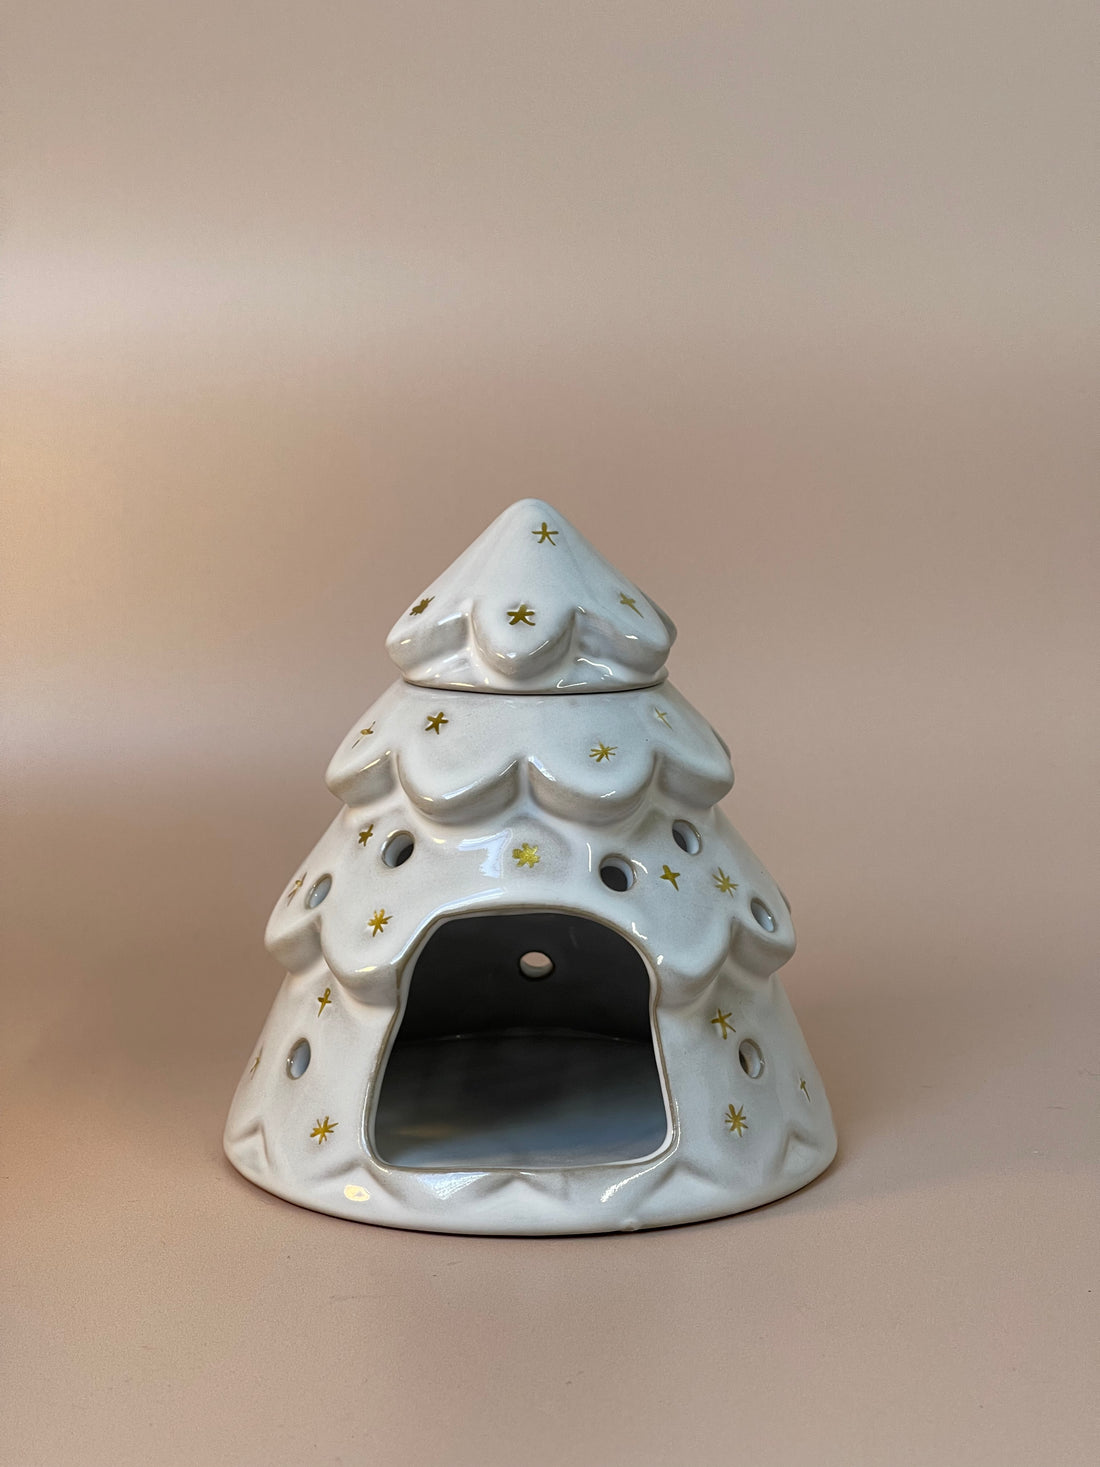 Christmas tree-shaped wax melt burner adorned with festive details, ideal for melting wax melts and spreading delightful holiday fragrances throughout your home.